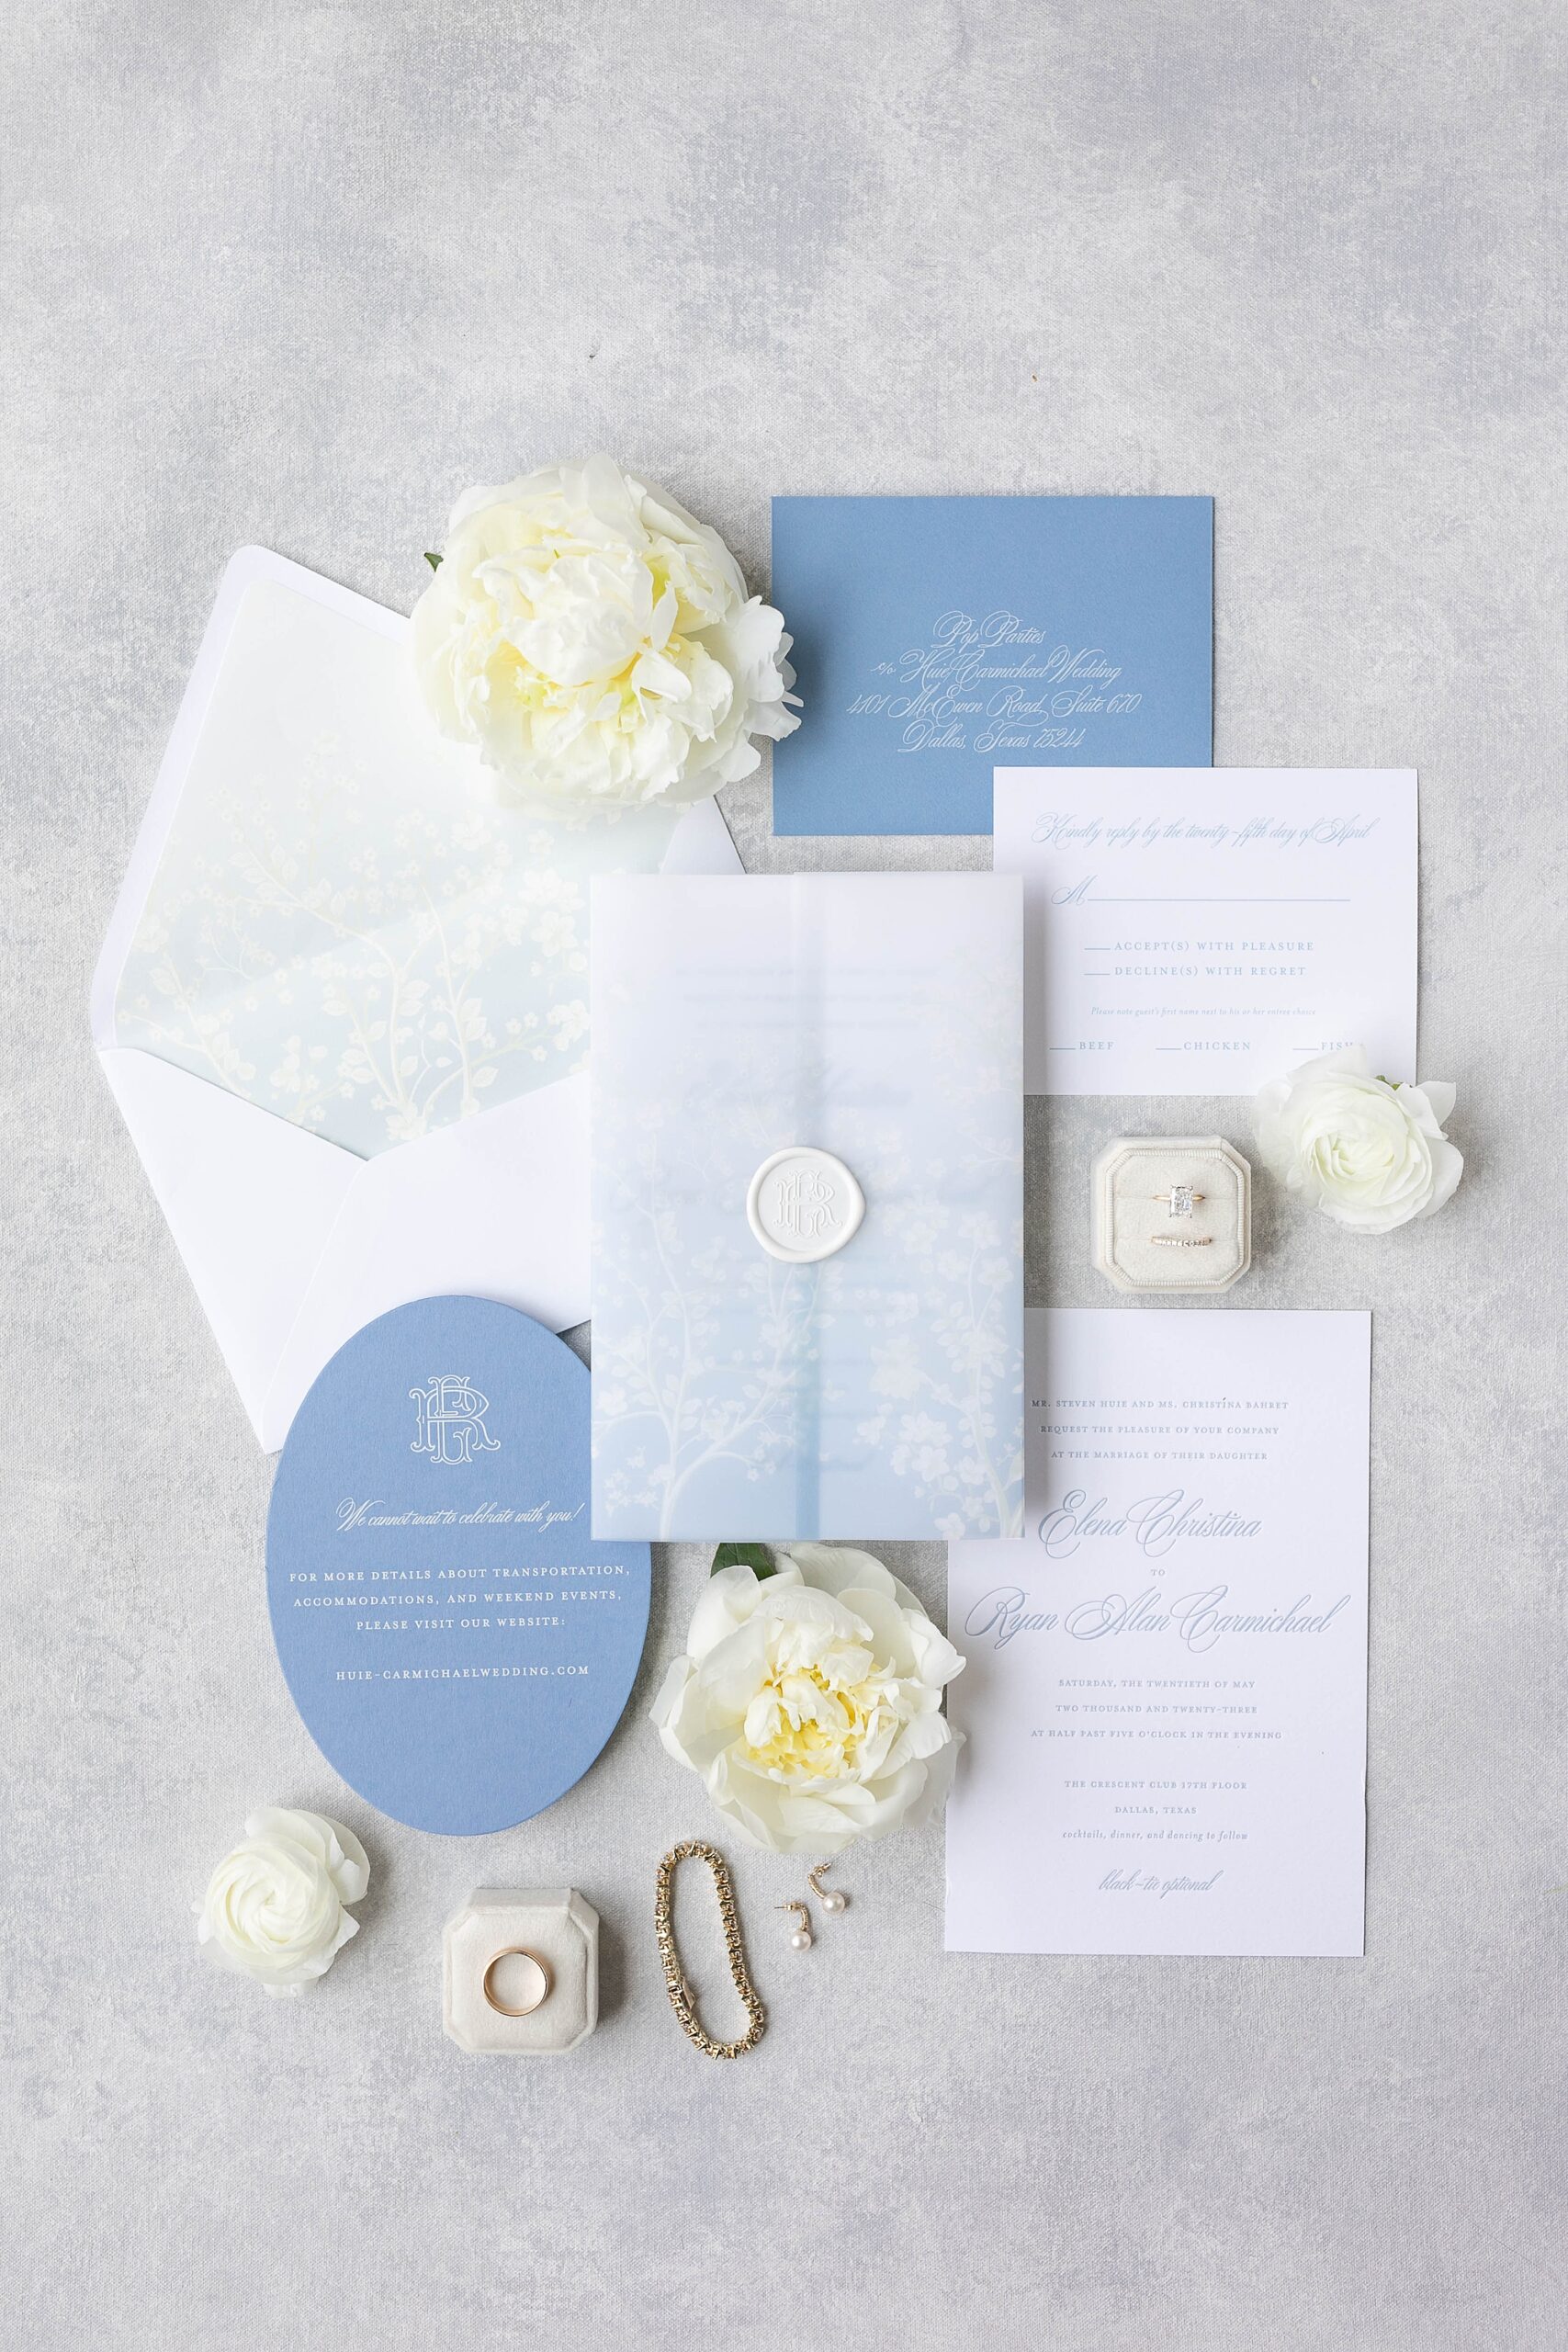 blue and white invitations for the Hotel Crescent Court wedding day